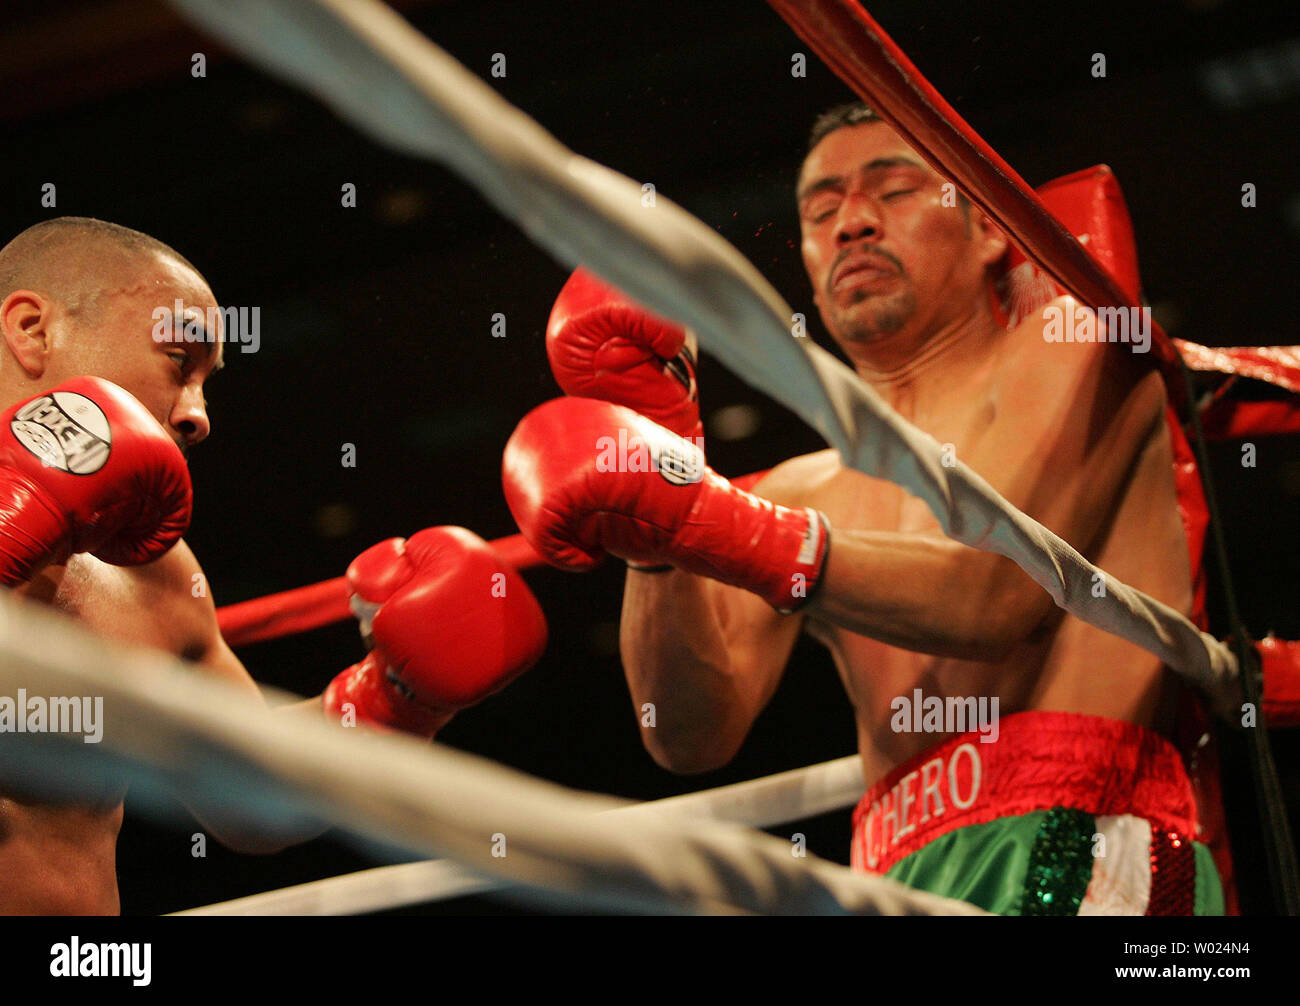 Former Olympic Silver Medalist Rocky Juarez of Houston,  TX batters Juan Carlos 'Ranchero' Ramirez of Juarez,  Mexico, in the 1st round at the Pechanga Indian Reservation, Temecula CA, March 4, 2005.     (UPI Photo/Roger Williams) Stock Photo